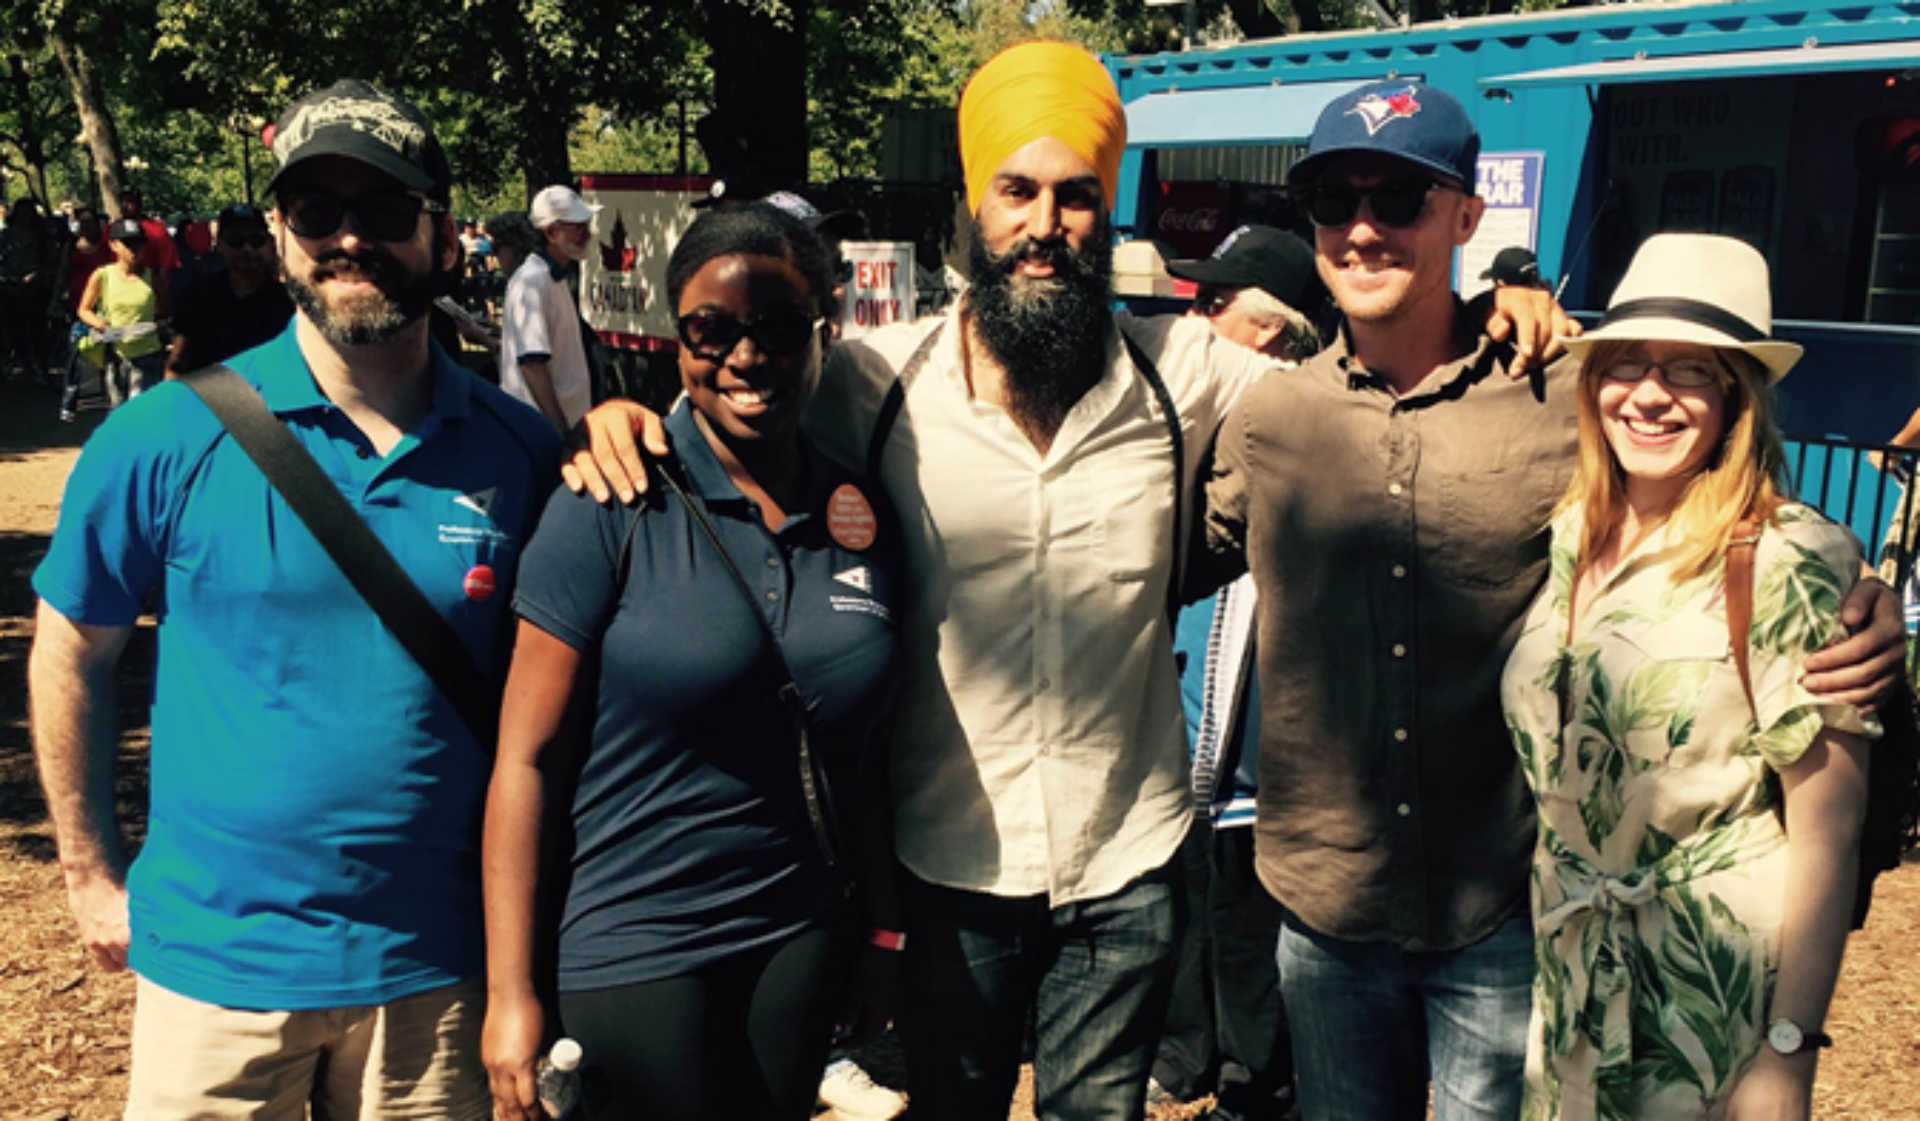 JAGMEET SINGH, THEN AN ONTARIO MPP, NOW LEADER OF THE FEDERAL NDP, WITH PEGO MEMBERS AND THEIR SUPPORTERS AT A LABOUR DAY PARADE